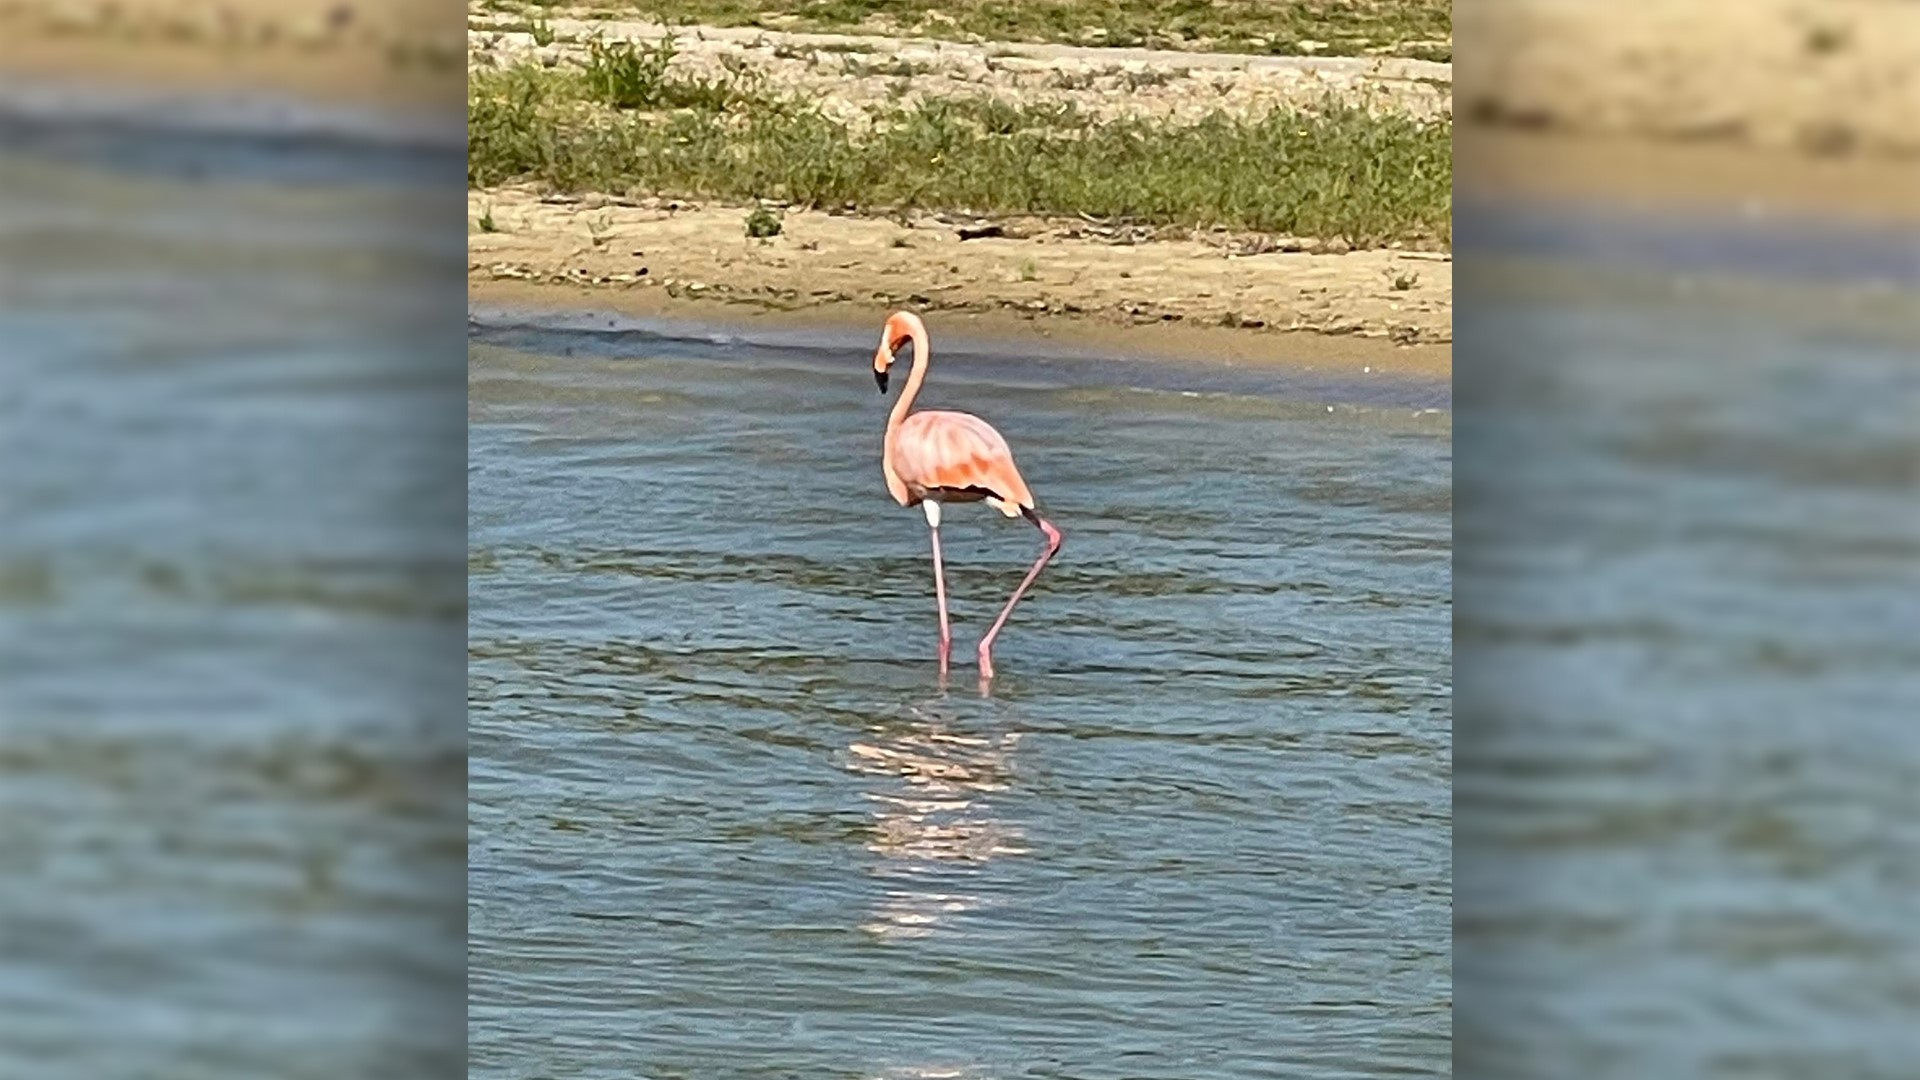 The Kentucky Department of Fish and Wildlife said the bird appears to be healthy, despite being picked up during the hurricane.